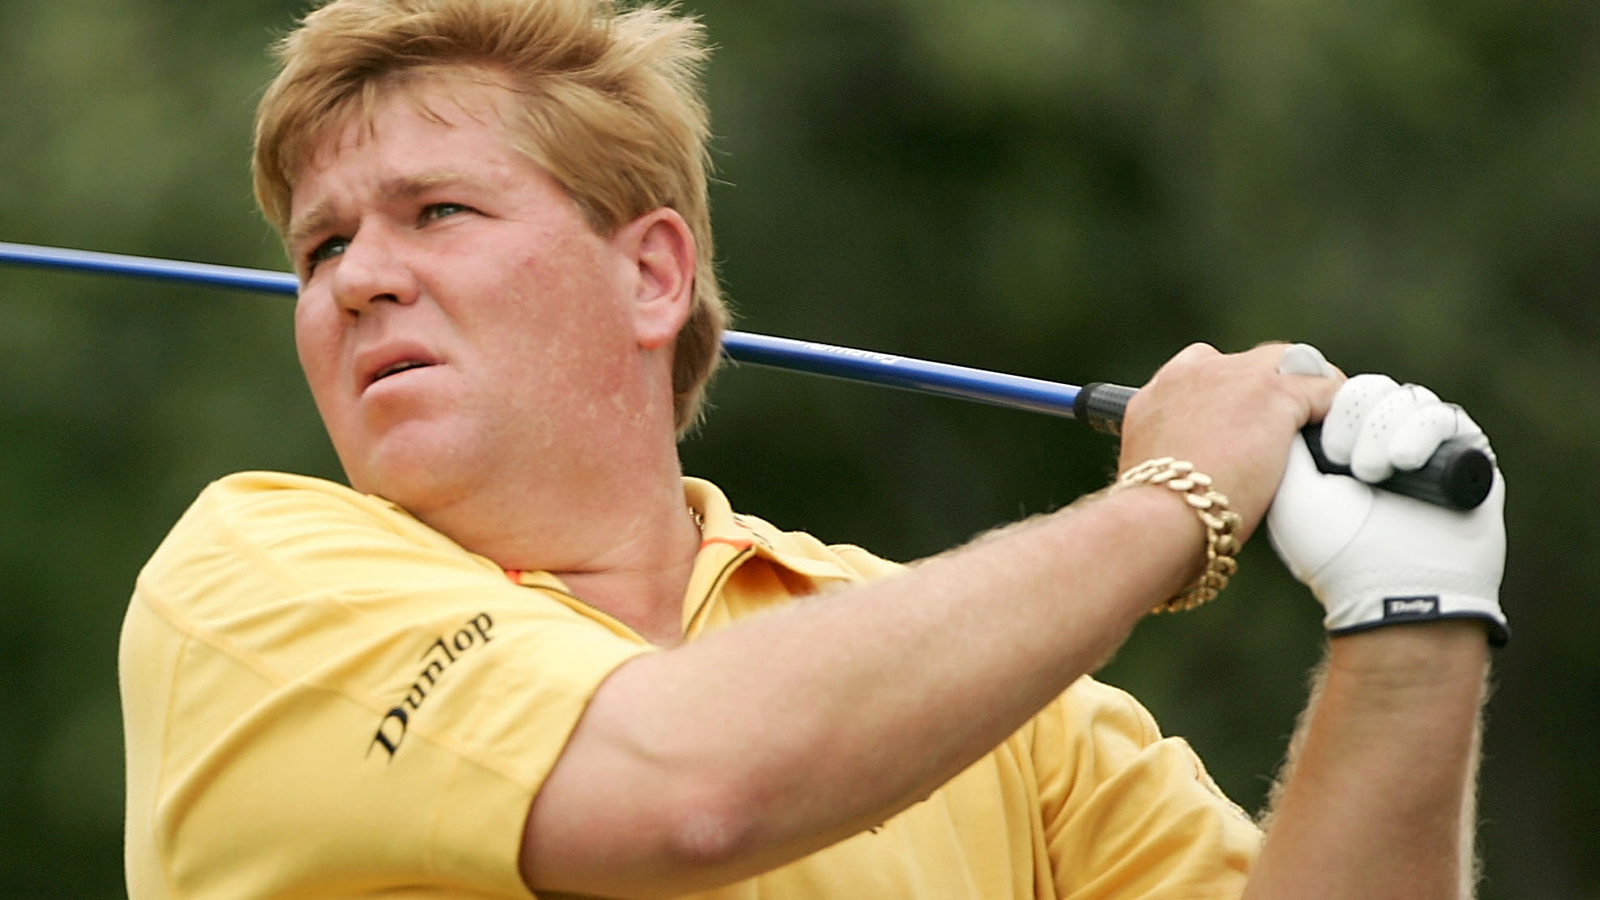 John Daly Once Lost $1.65 Million In Five Hours While Gambling